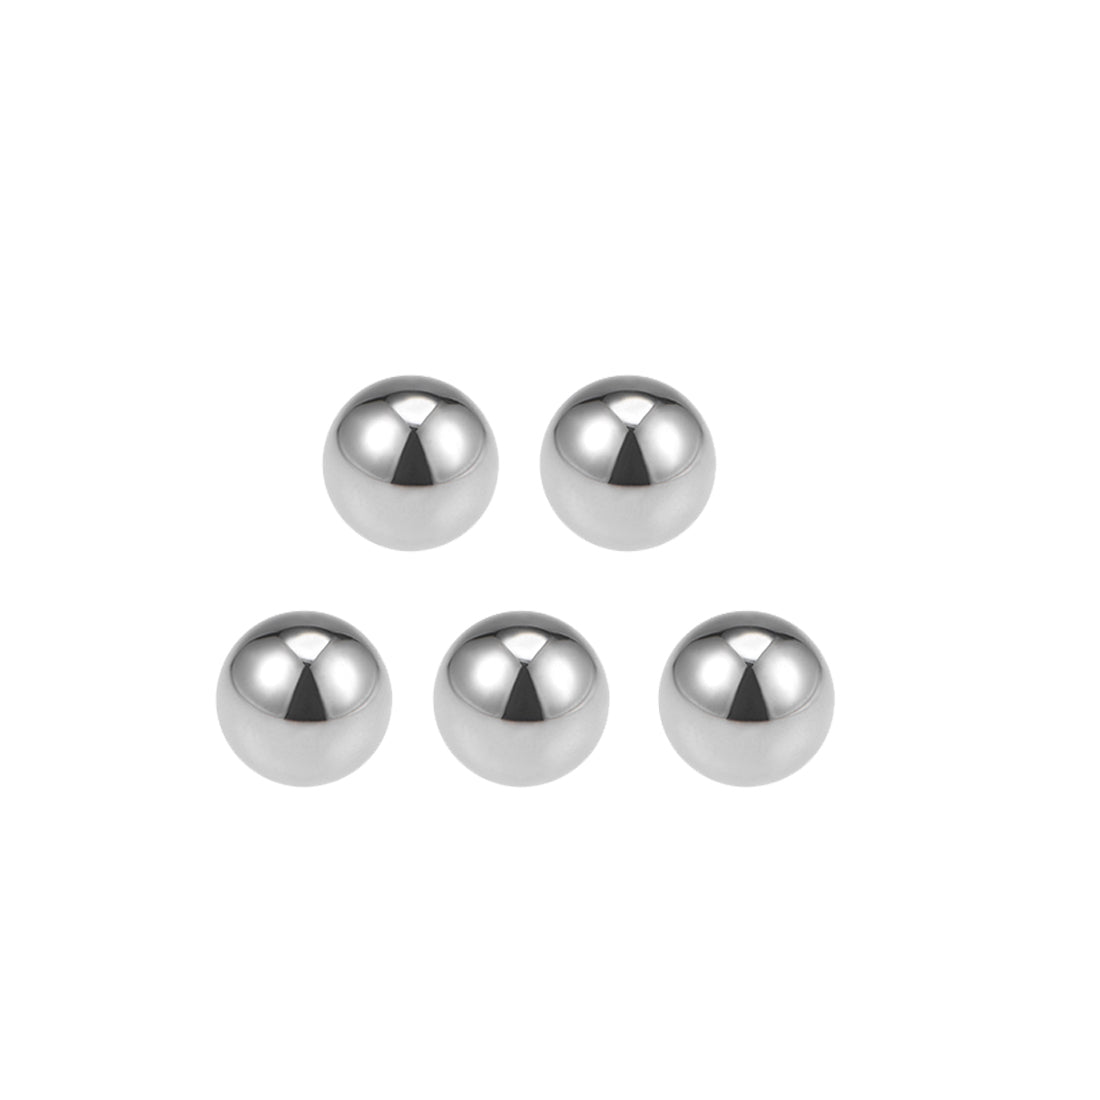 uxcell Uxcell Precision Balls 19/32" Solid Chrome Steel G10 for Ball Bearing Wheel 10pcs